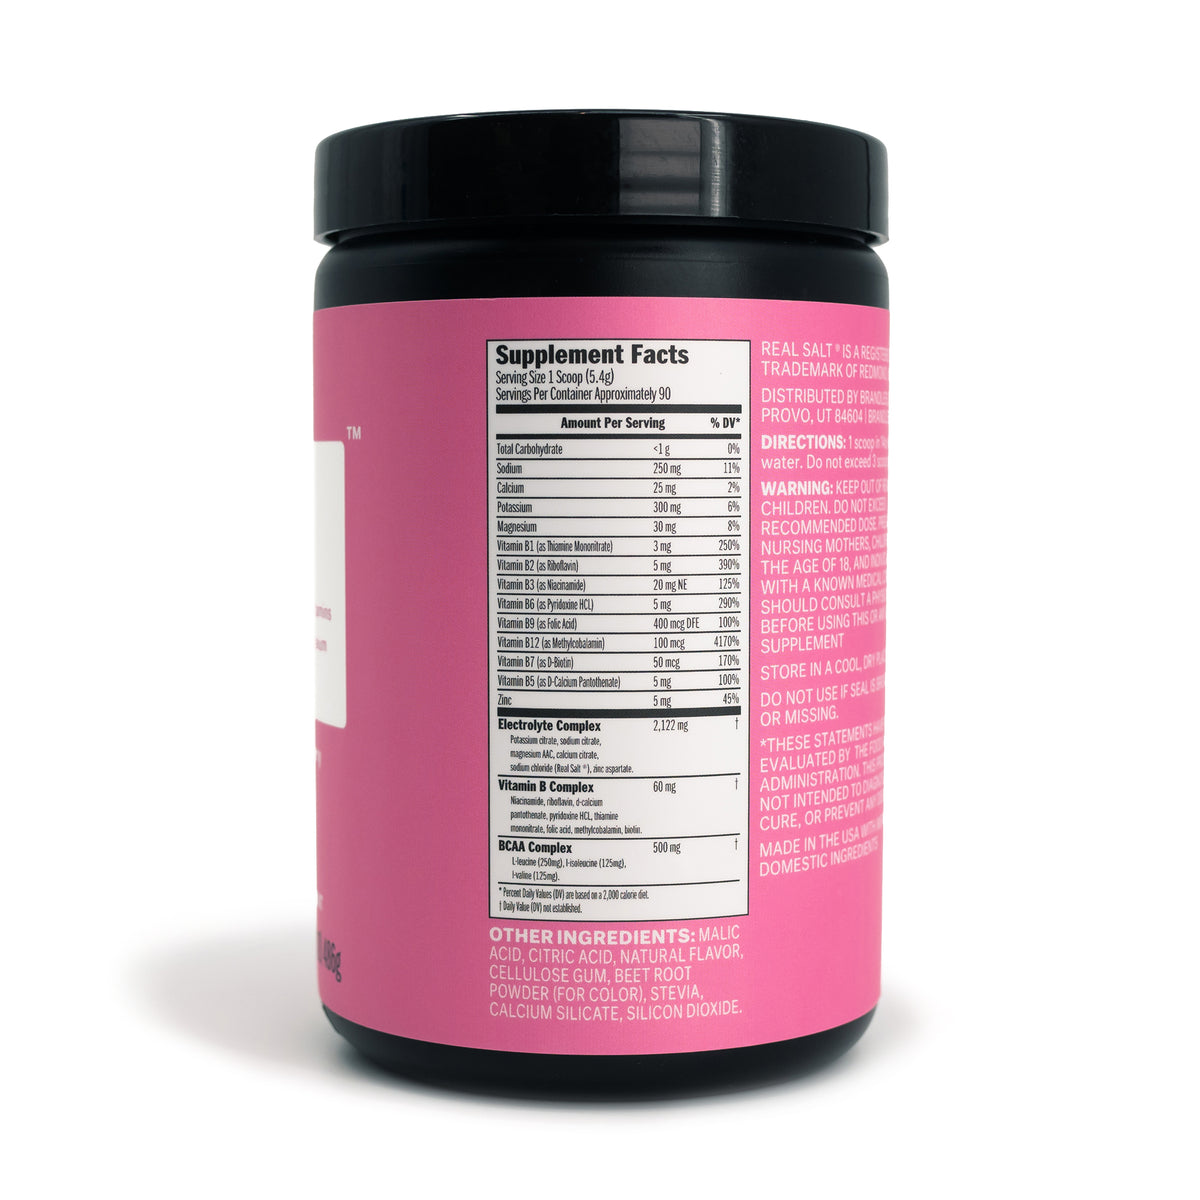 Tub side view.  Supplement Facts: Serving size: 1 scoop (5.4g), Total carbohydrate: &lt;1g 0%, Sodium 250mg, 11%, Calcium 25mg 2%, Potassium 300mg 6%, Magnesium 30 mg 8%, Vitamin B1 3mg 250%, Vitamin B2 5mg 390%